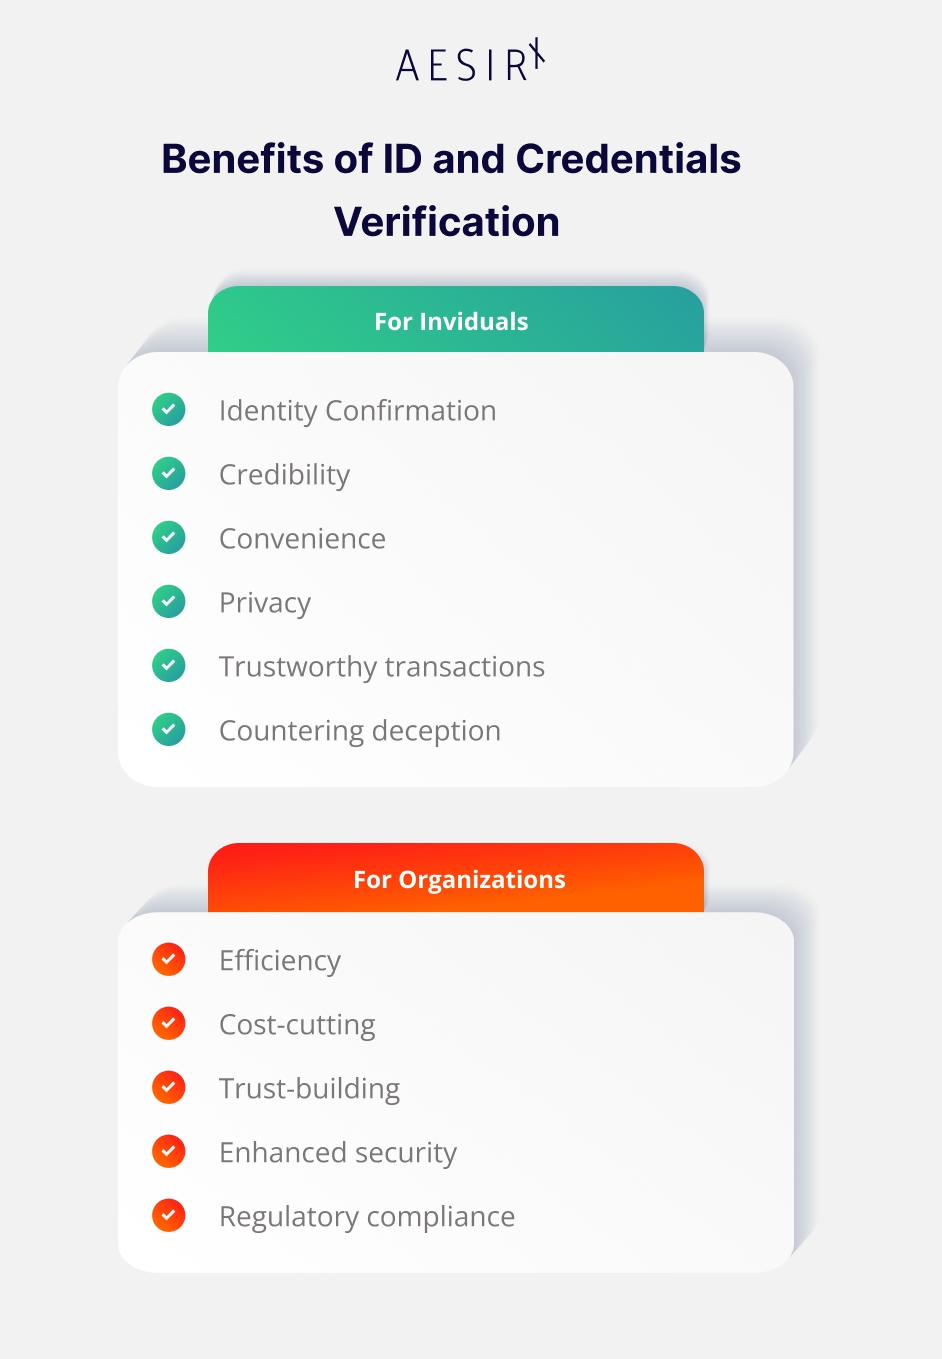 ID and credentials verification benefits for both individuals and organizations 